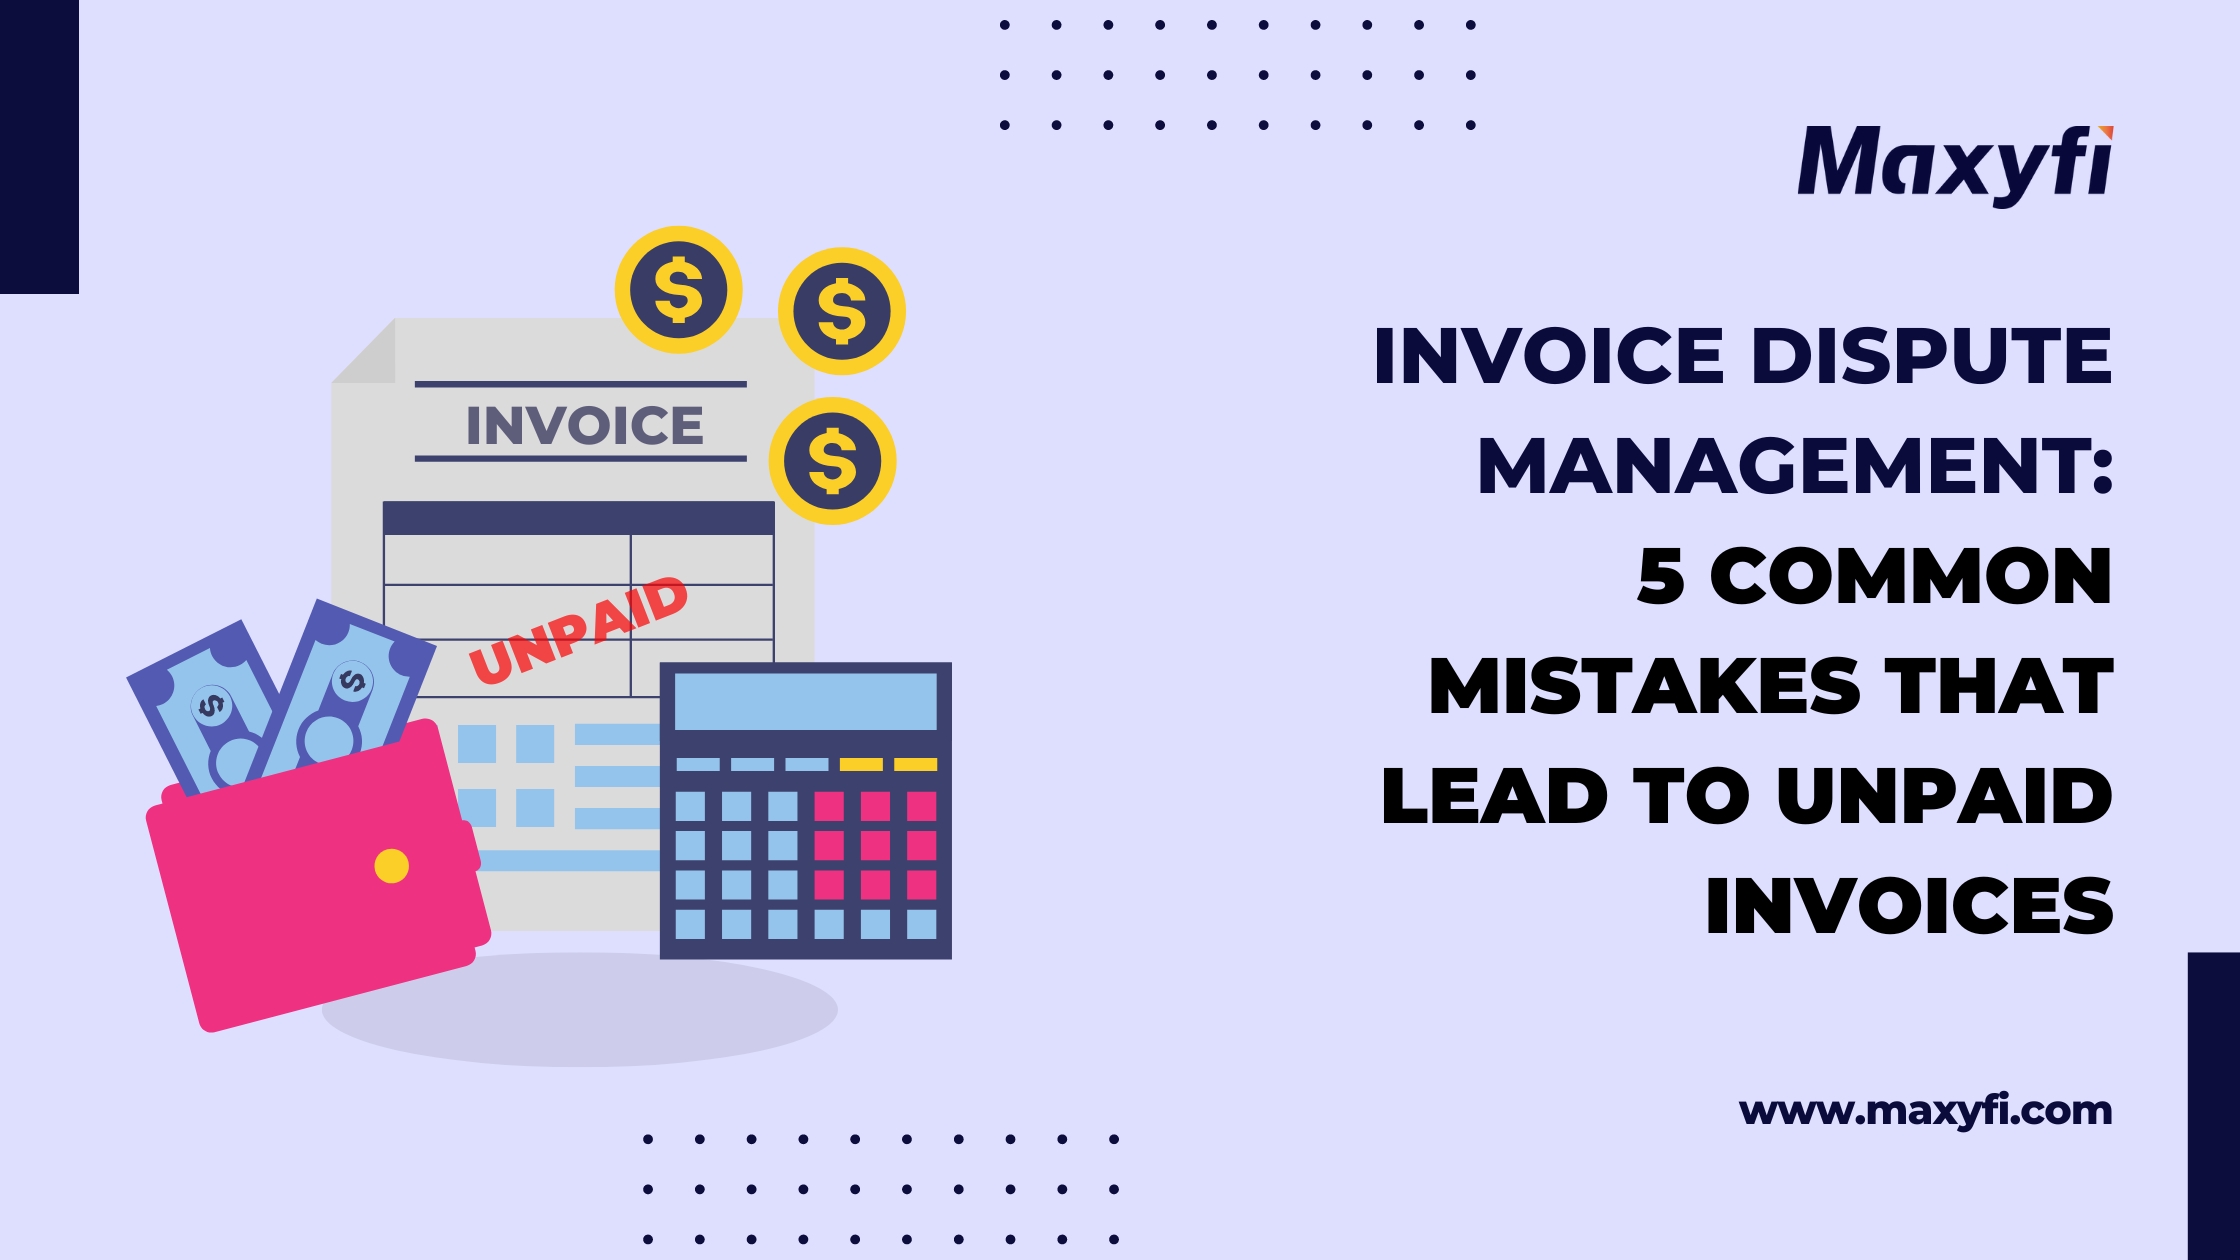 Invoice Dispute Management: 5 Common Mistakes That Lead to Unpaid Invoices